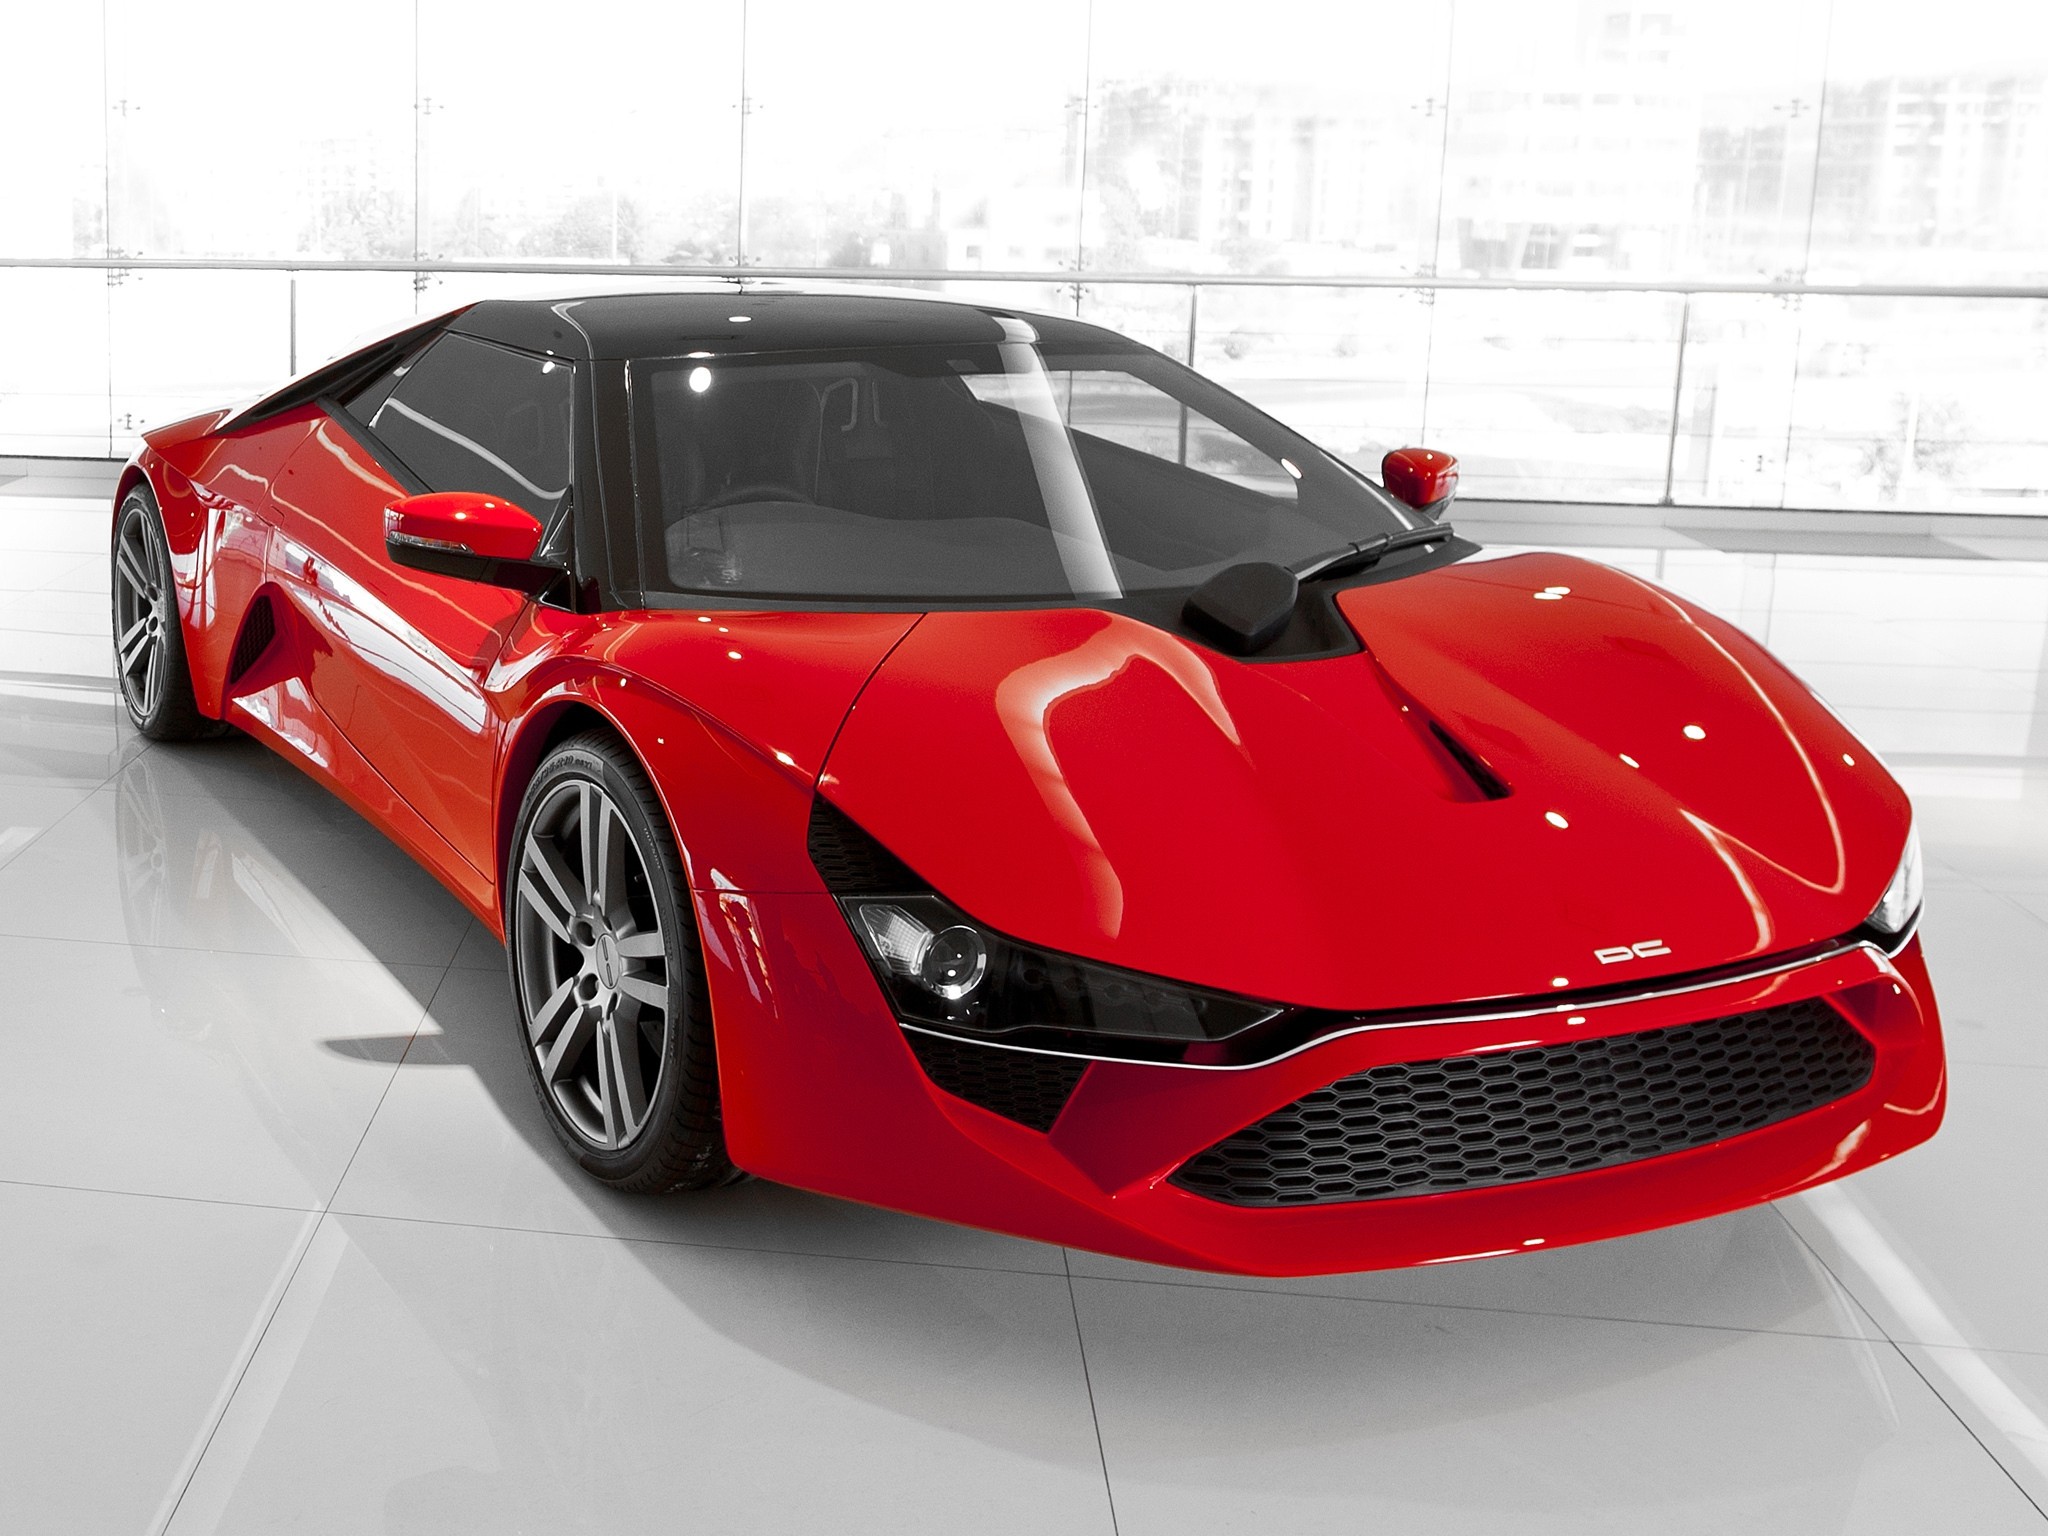 Full HD cars, auto, red, front view, supercar, avanti